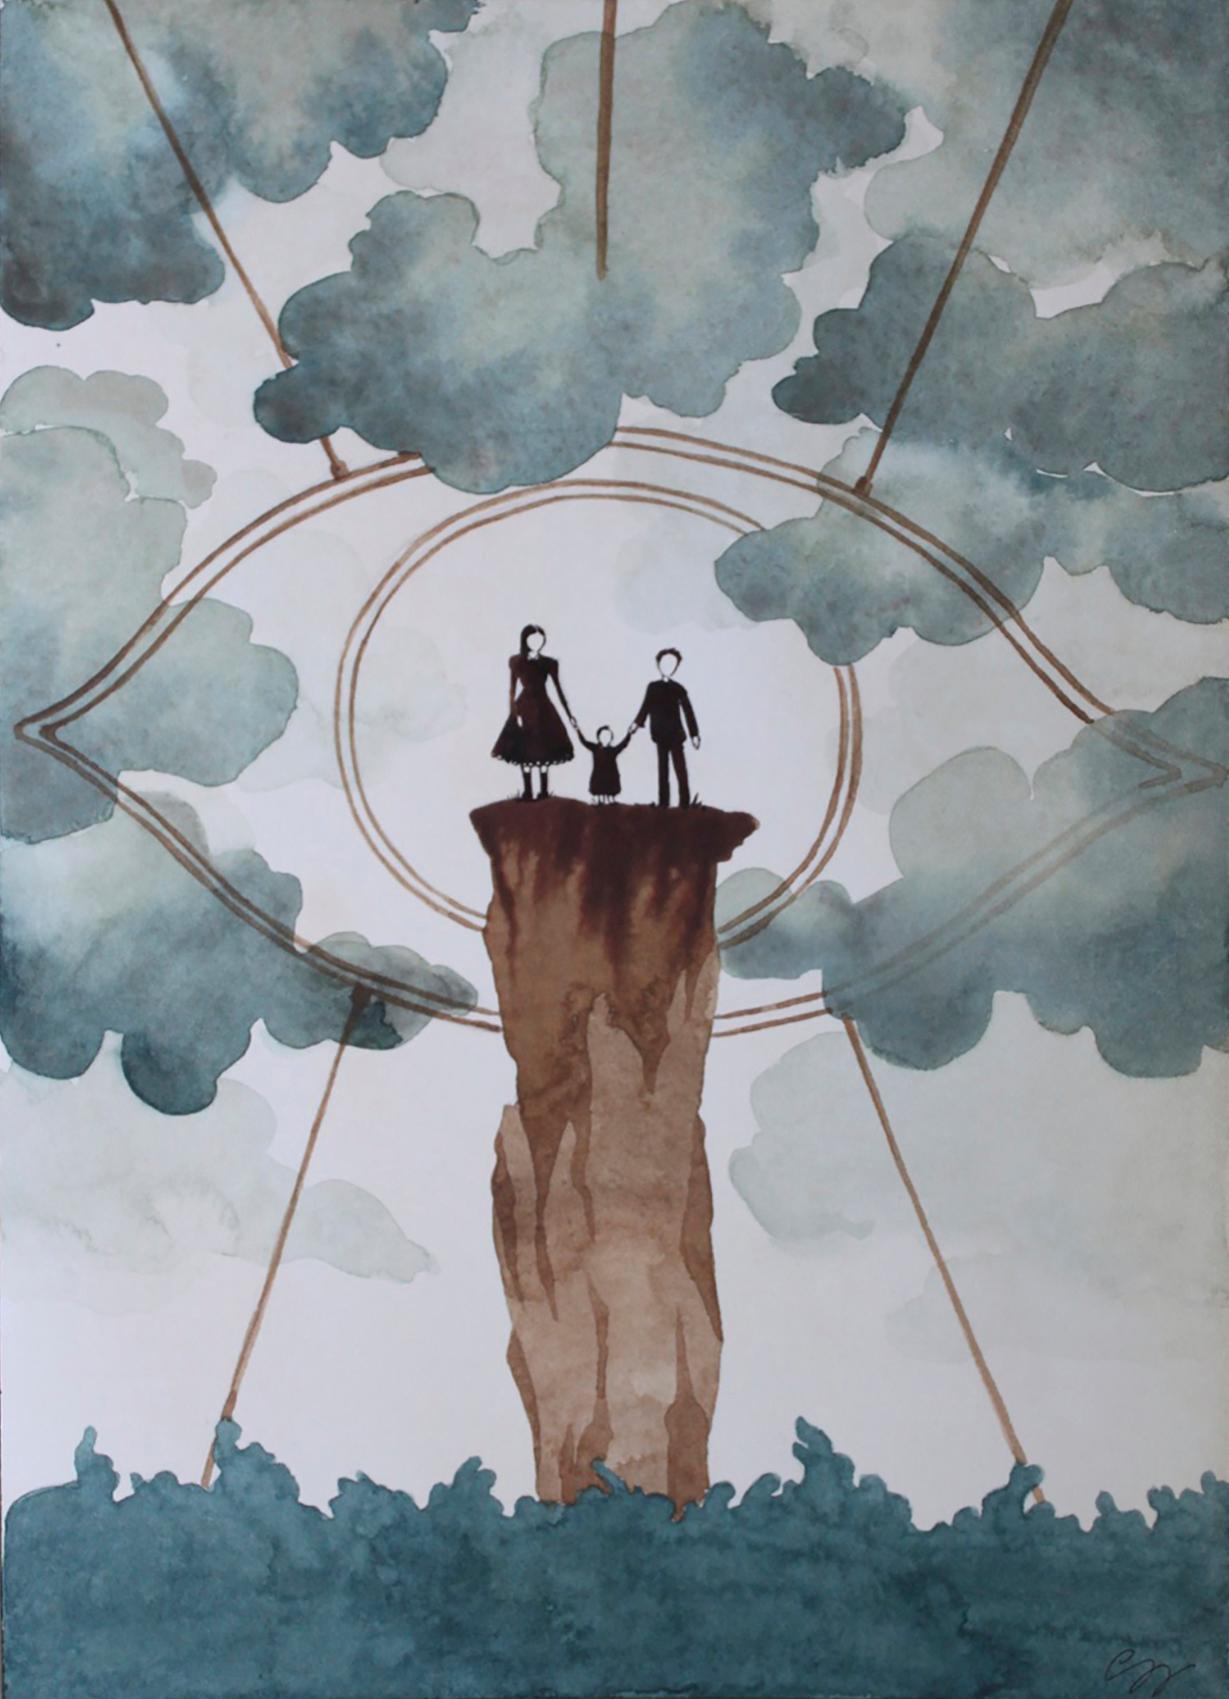 The Island Chamisa Kellogg, Watercolor painting on wood
One-of-a-kind
Signed on front
2015
10.25 in. h x 7 in. w 
0 lbs. 1 oz.  

Artist Comments 
Inspired by the classic Lemony Snicket series, the image features the three children from the stories